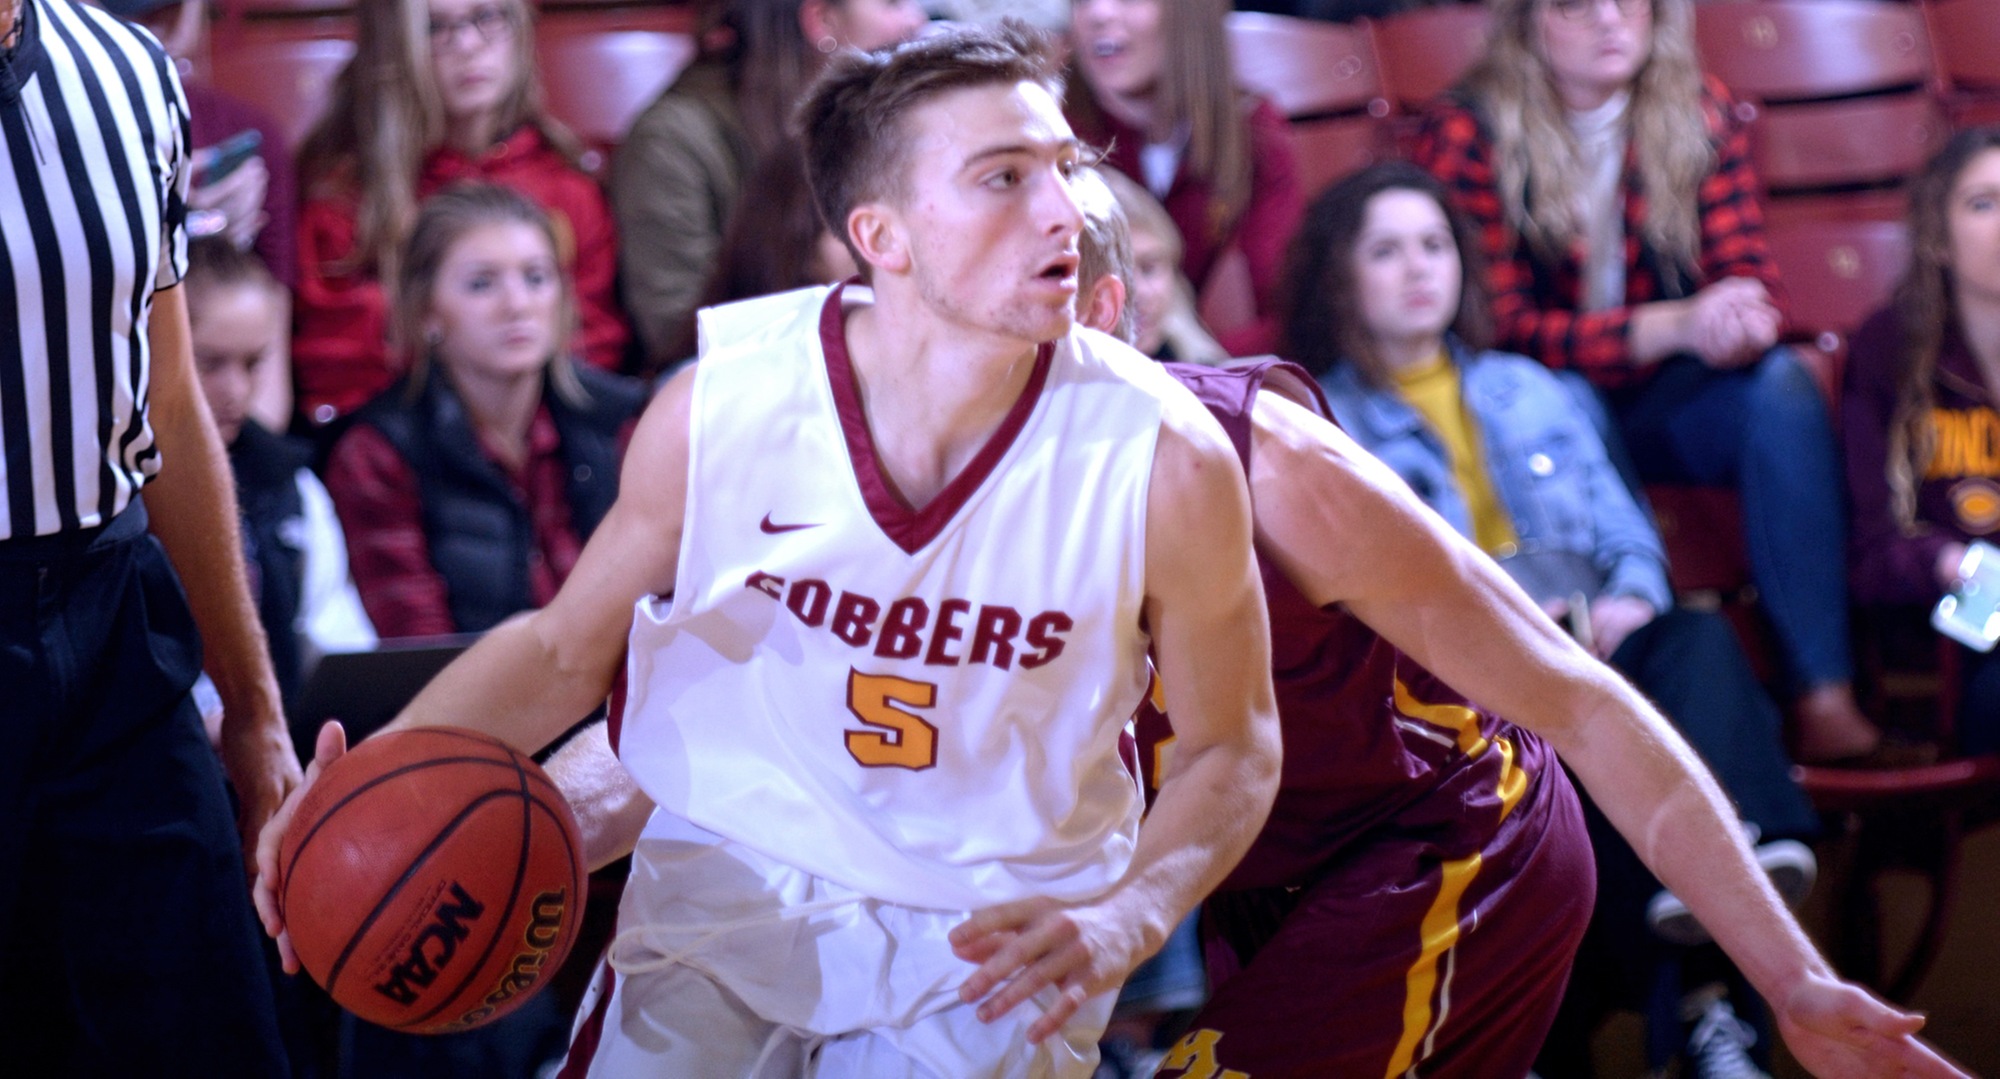 Freshman Bryden Urie scored a career-high 16 points to help Concordia earn its first conference win of the season.